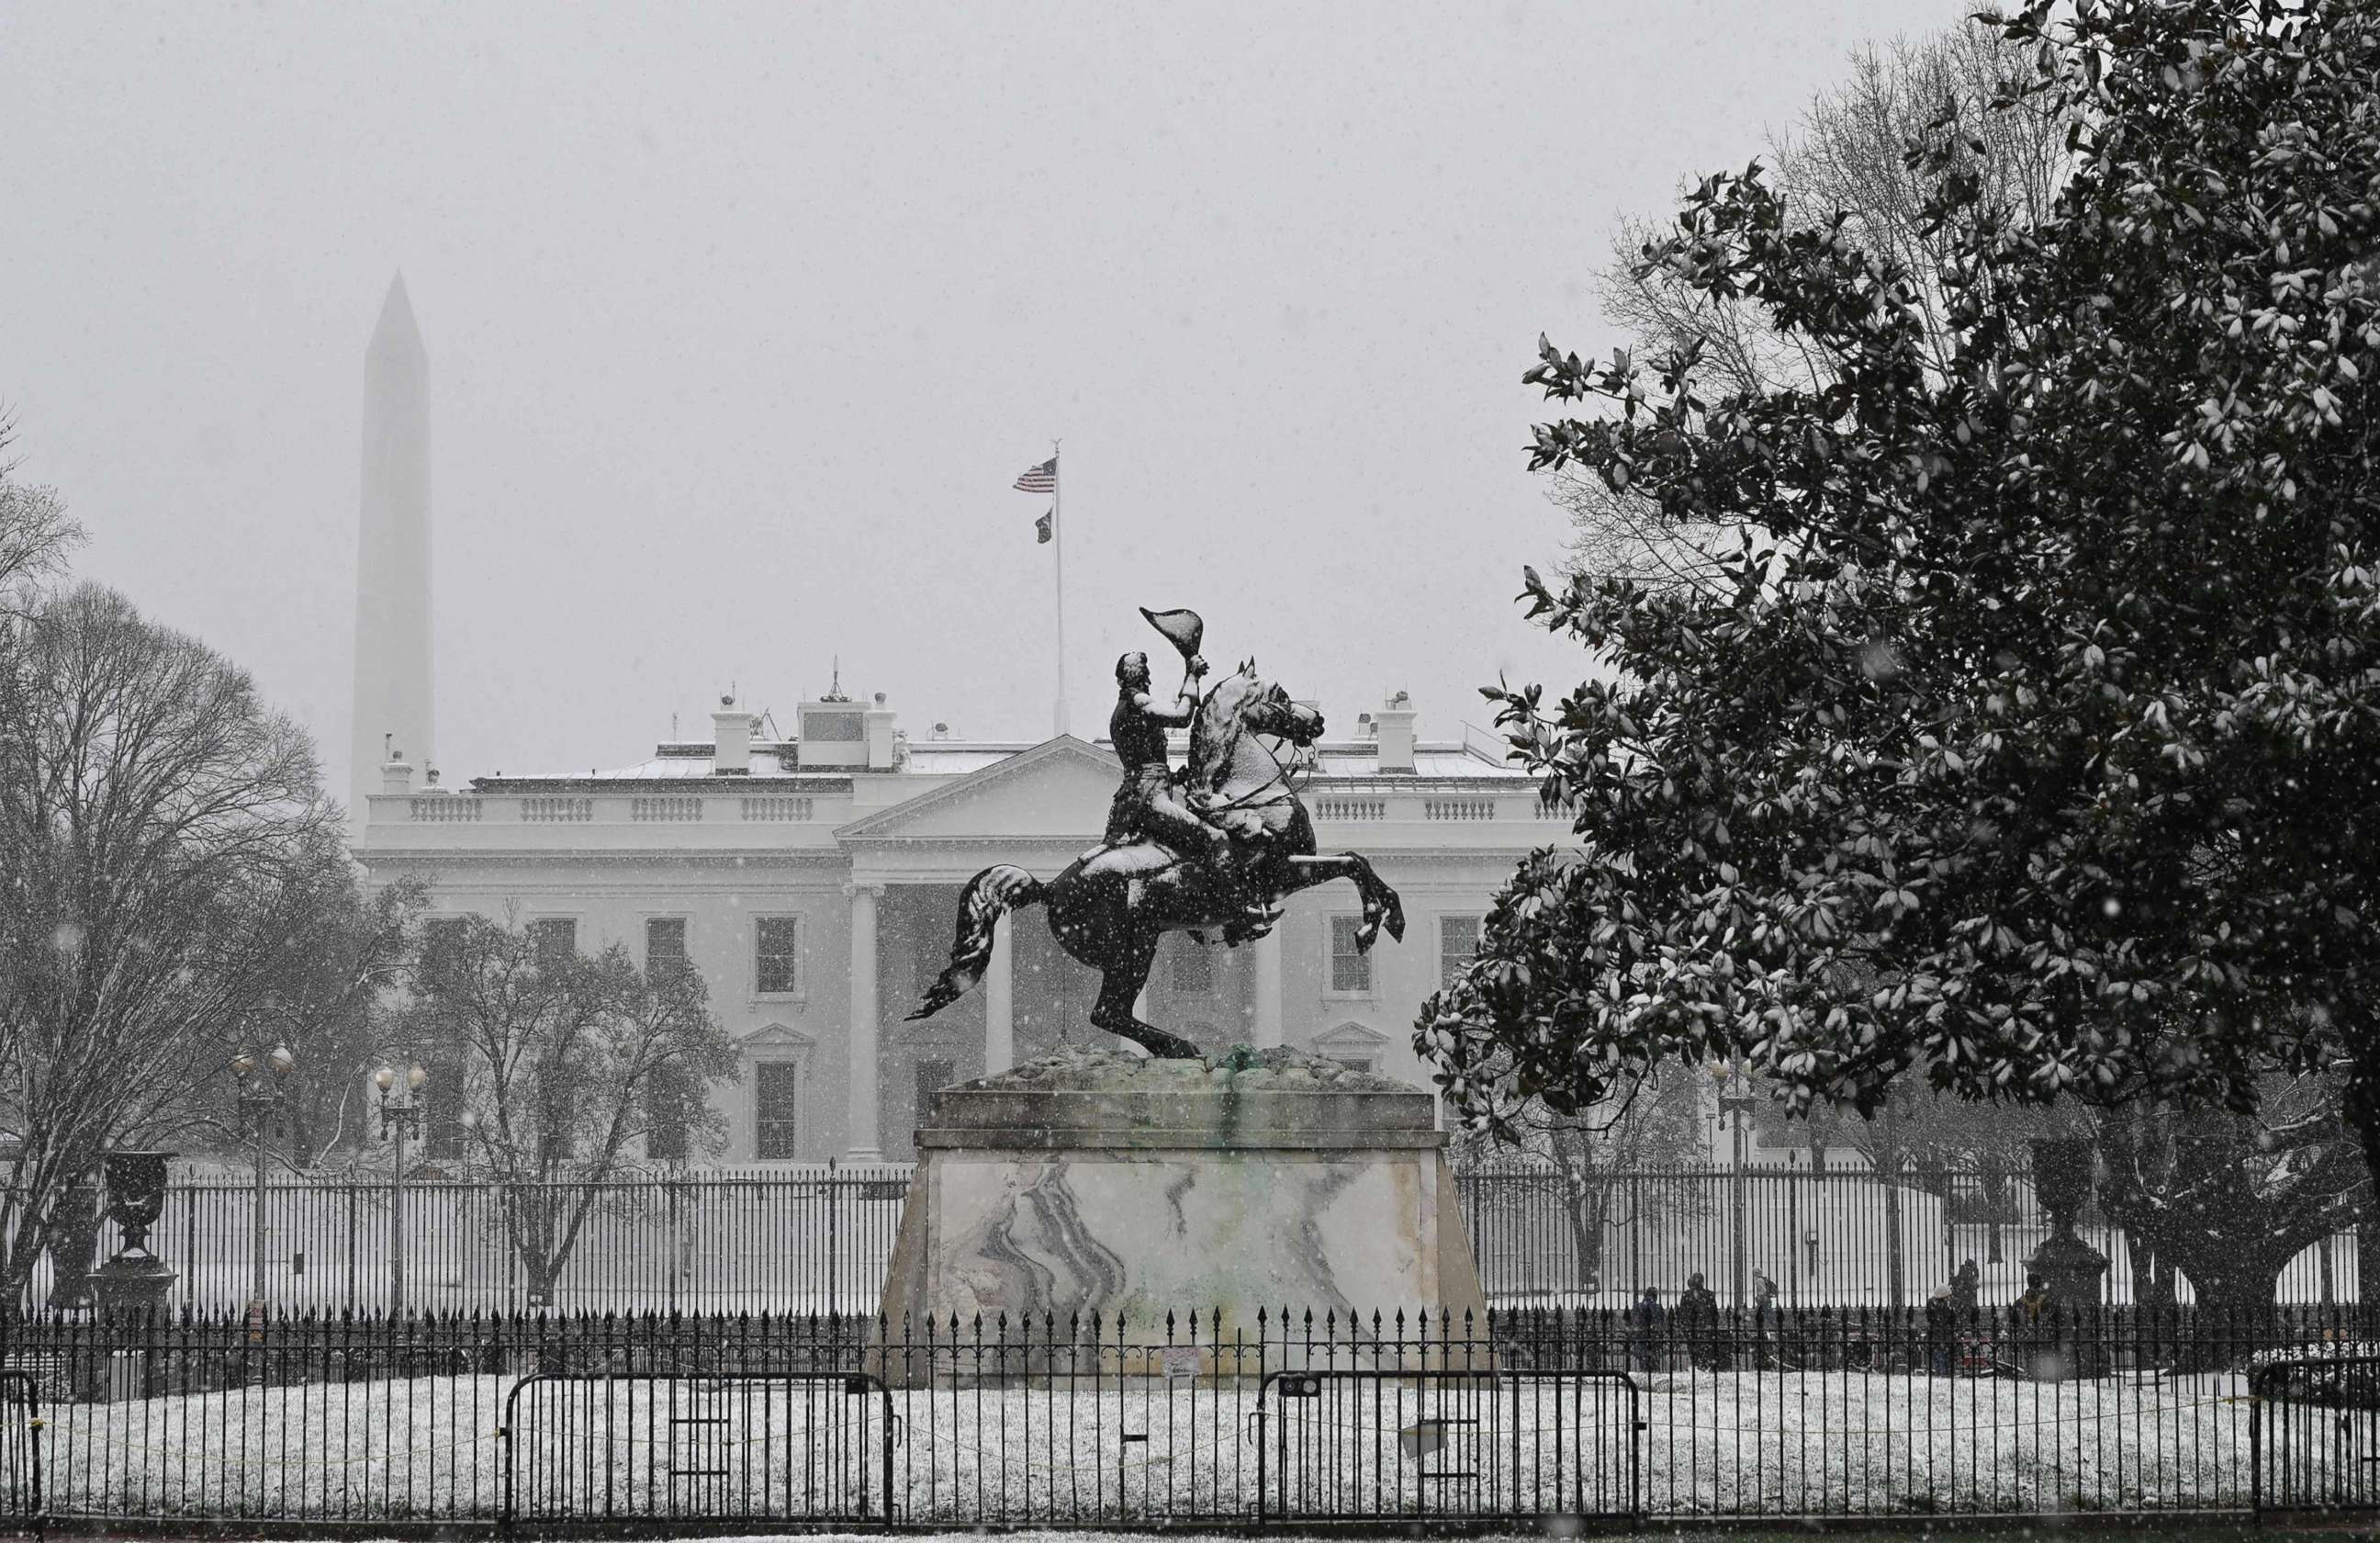 PHOTO: Snow falls on March 12, 2022 at the White House in Washington, D.C., during a late winter storm.